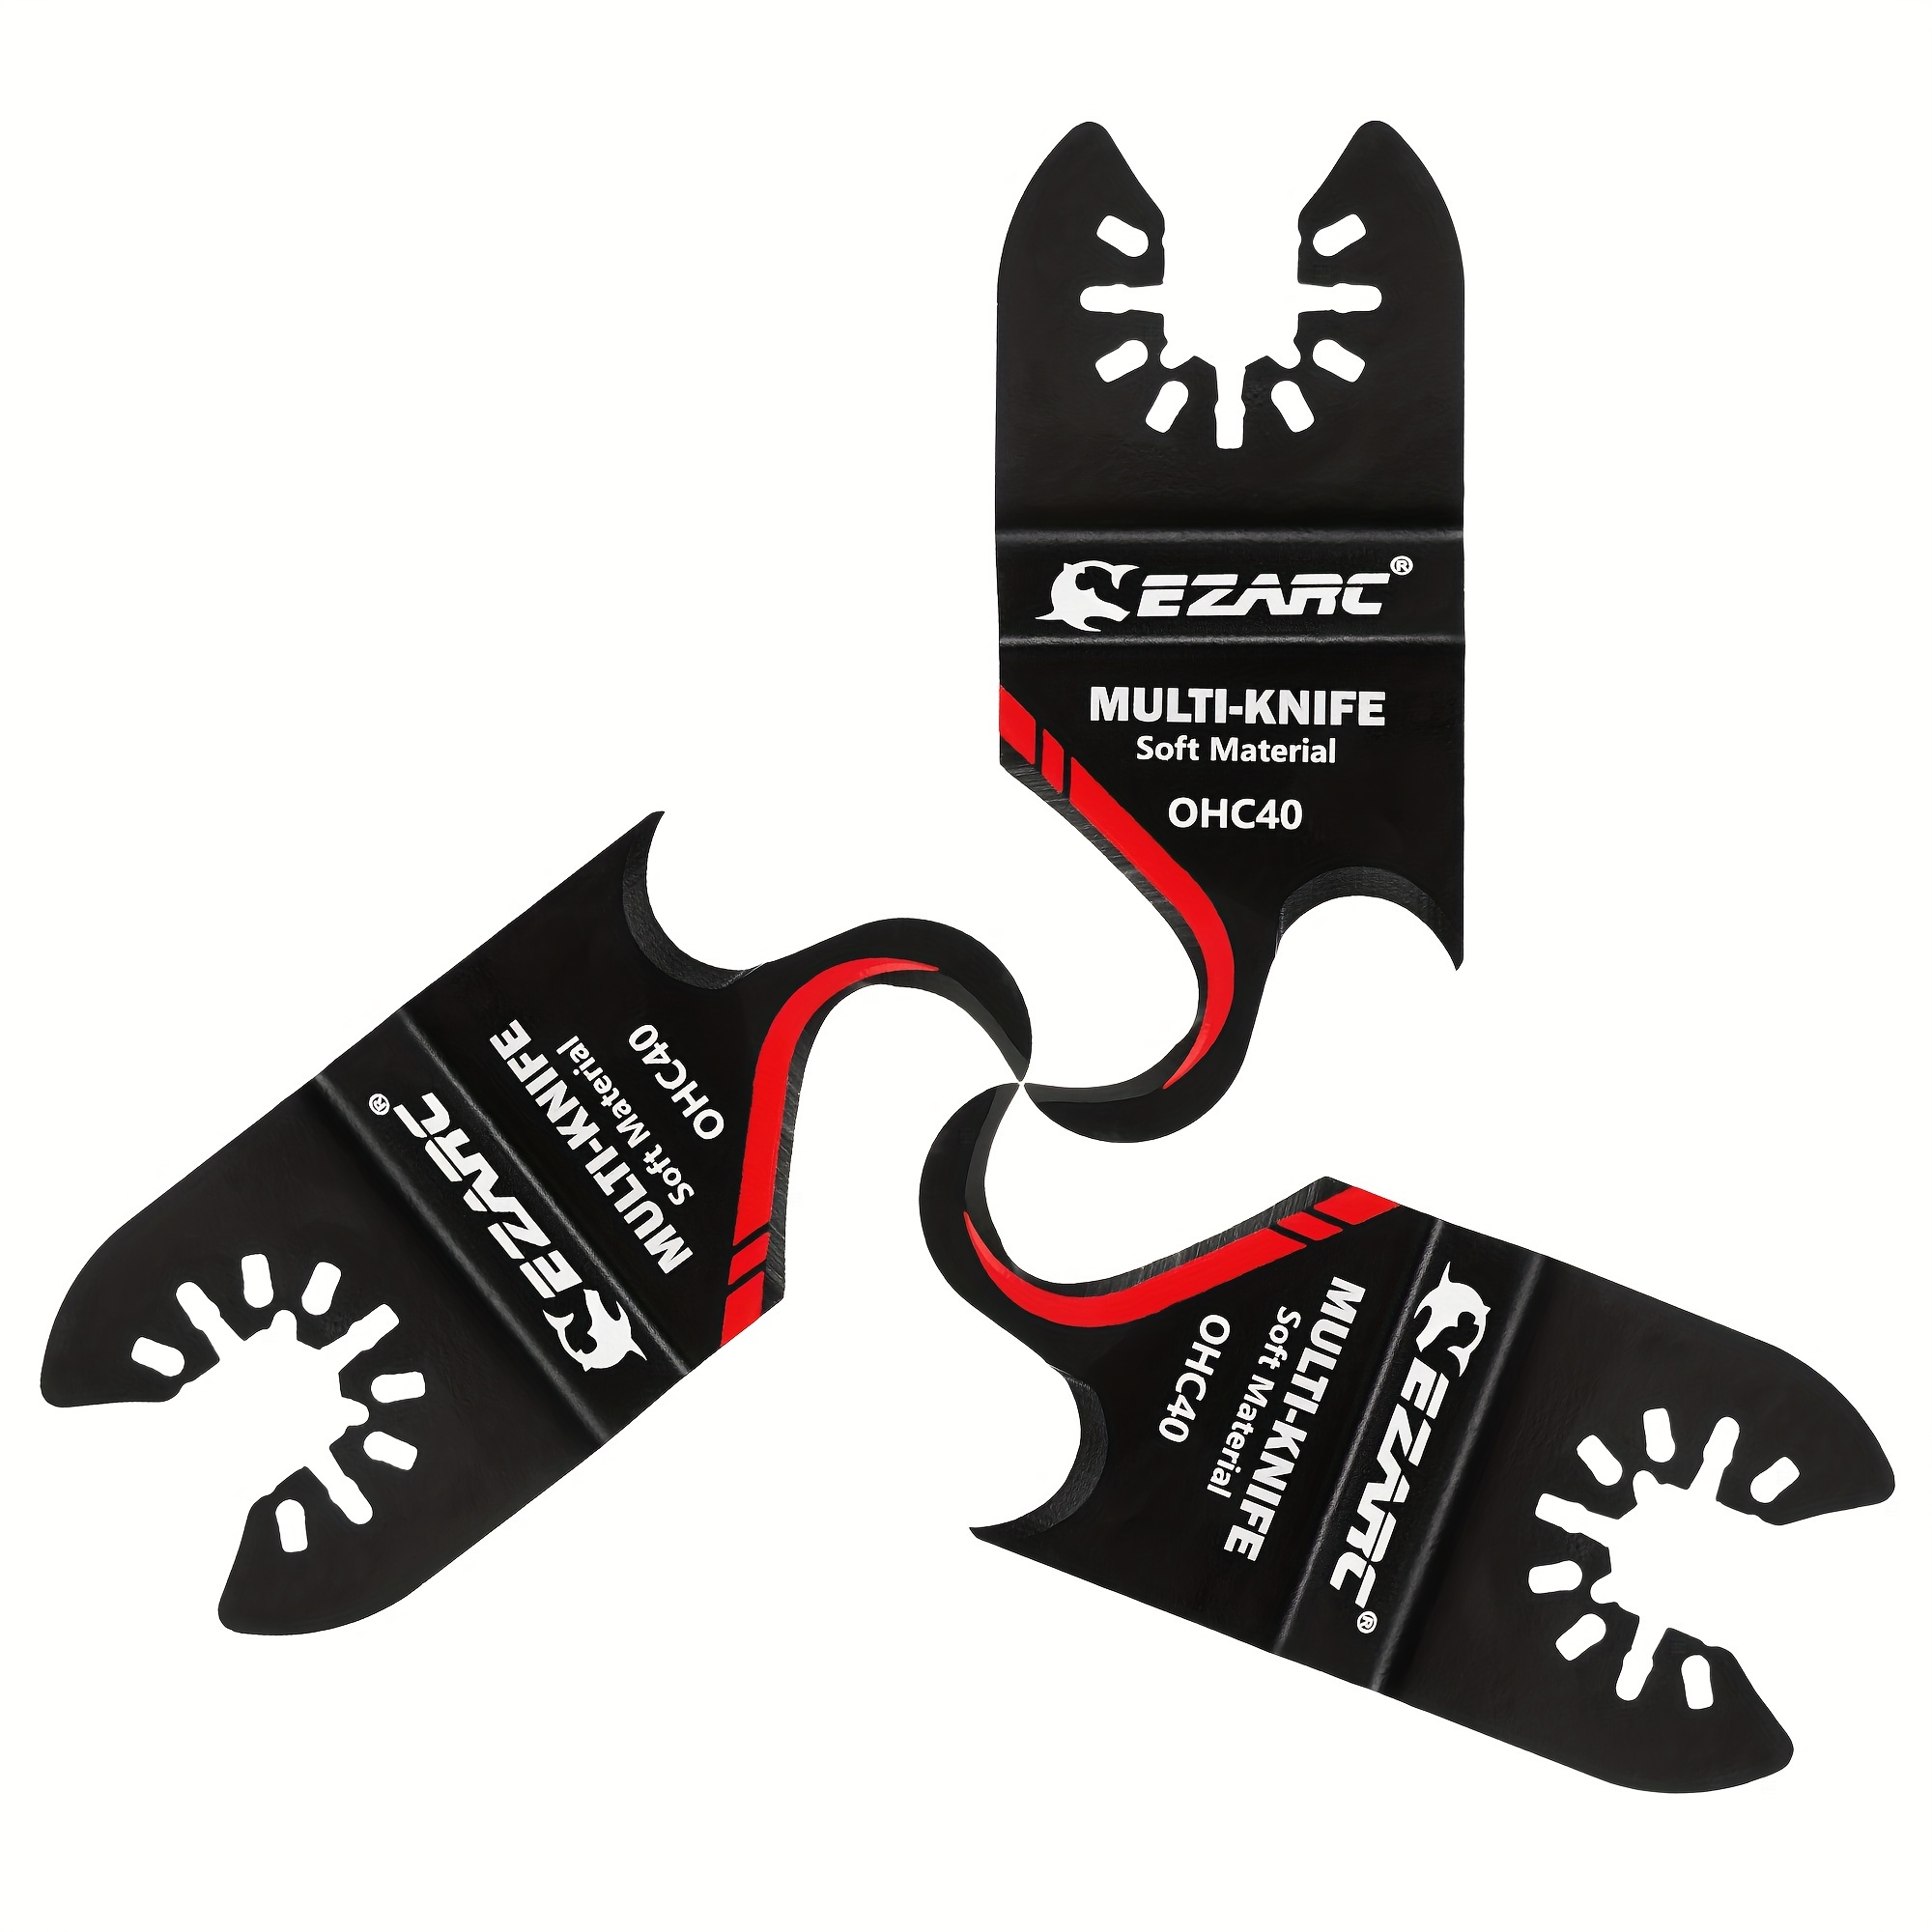 

Ezarc 3pcs Oscillating Multi Tool Hook Knife Blade, Twin-hook Design Multitool Saw Blades For Cutting Soft Materials Roofing Shingles, Pvc Carpet And Cardboard, Universal Compatibility